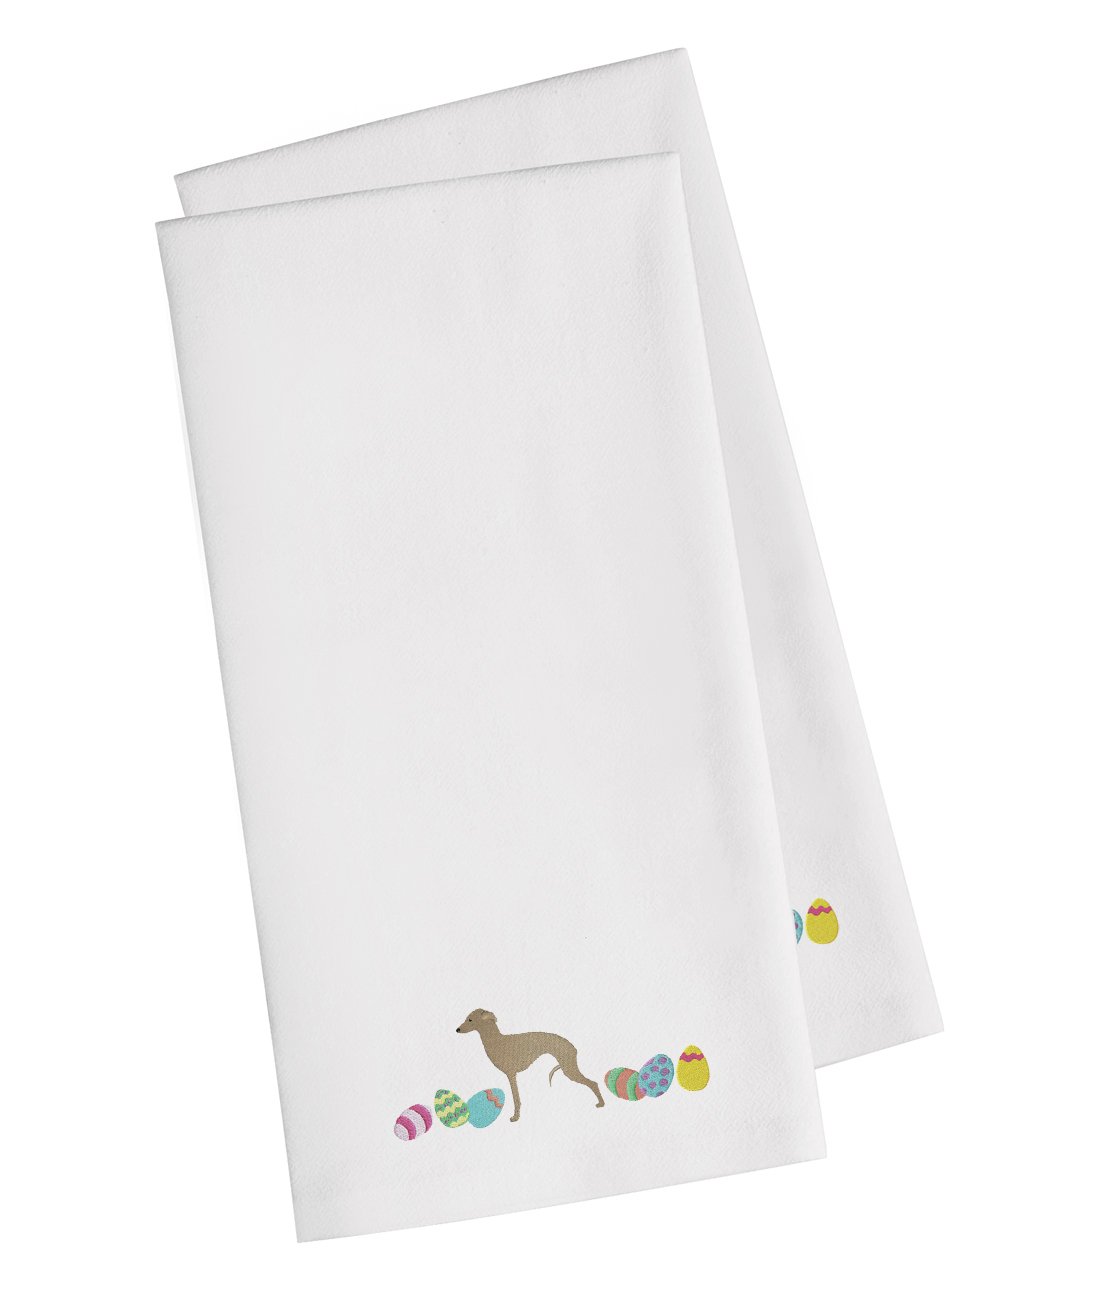 Italian Greyhound Easter White Embroidered Kitchen Towel Set of 2 CK1655WHTWE by Caroline's Treasures